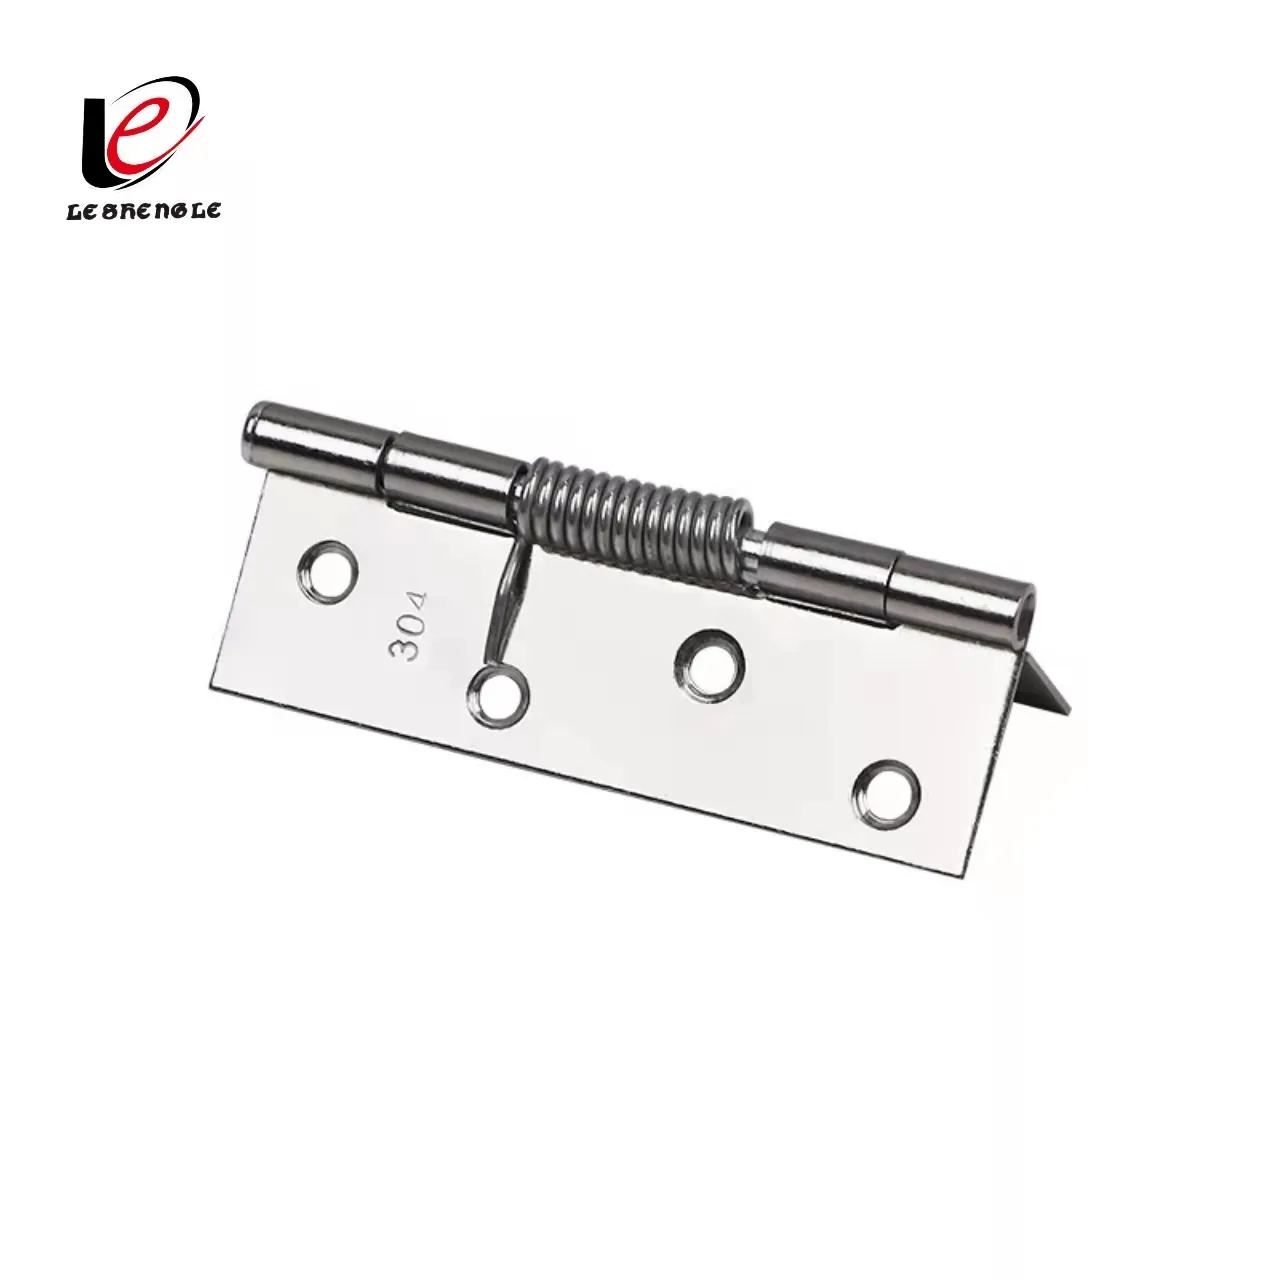 The manufacturer directly provides the closing device for stainless steel hinge self closing spring hinge door